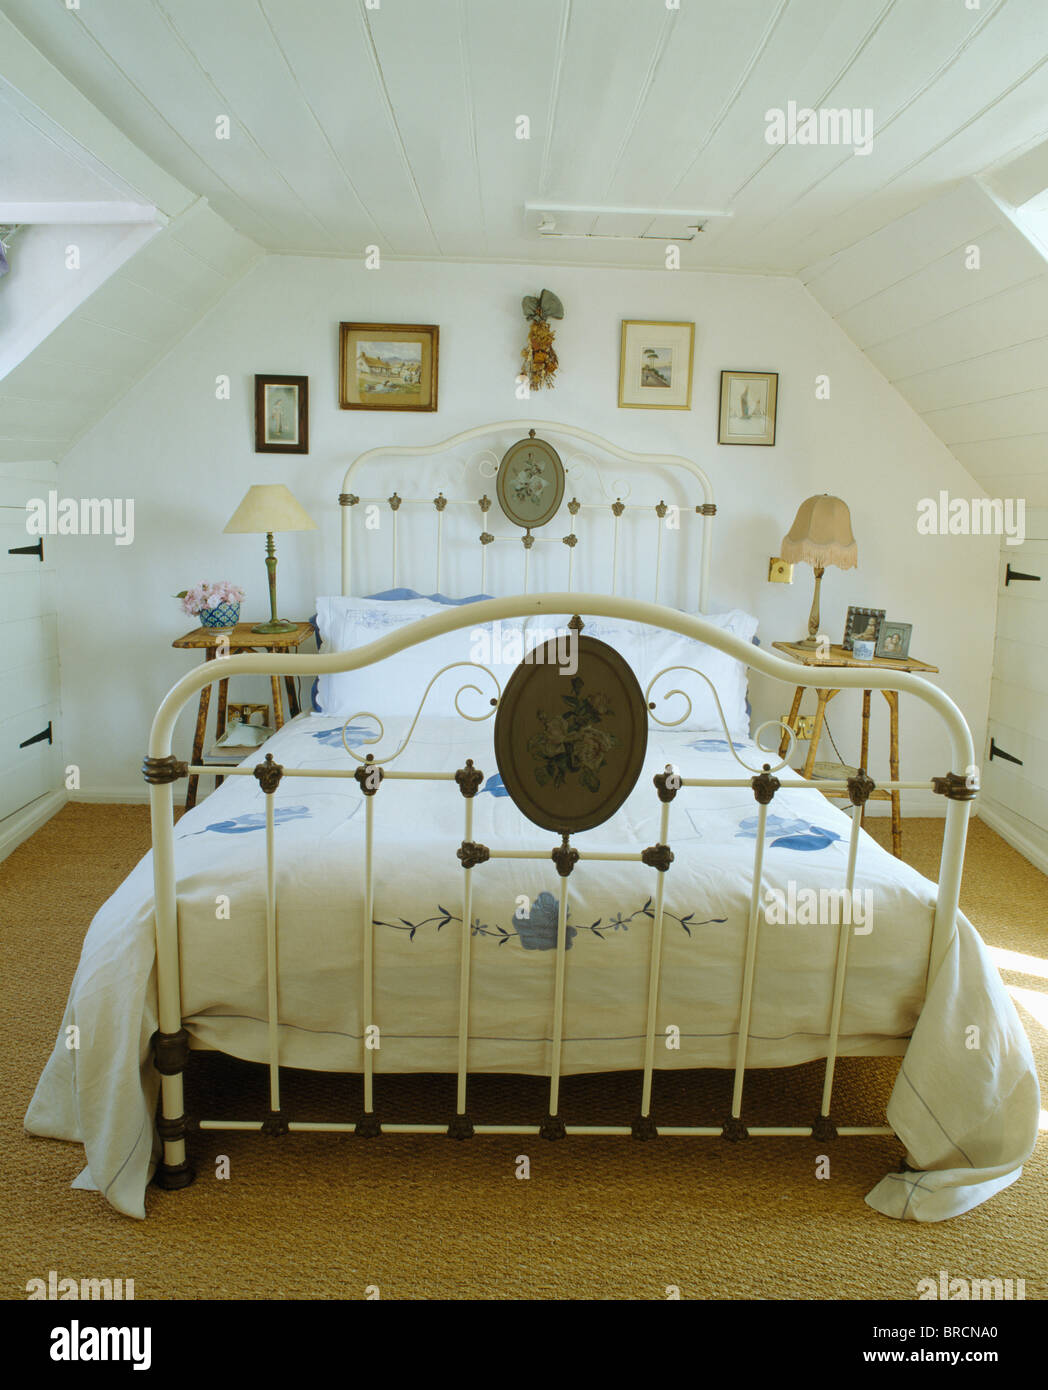 White wrought iron antique bed in white attic bedroom Stock Photo